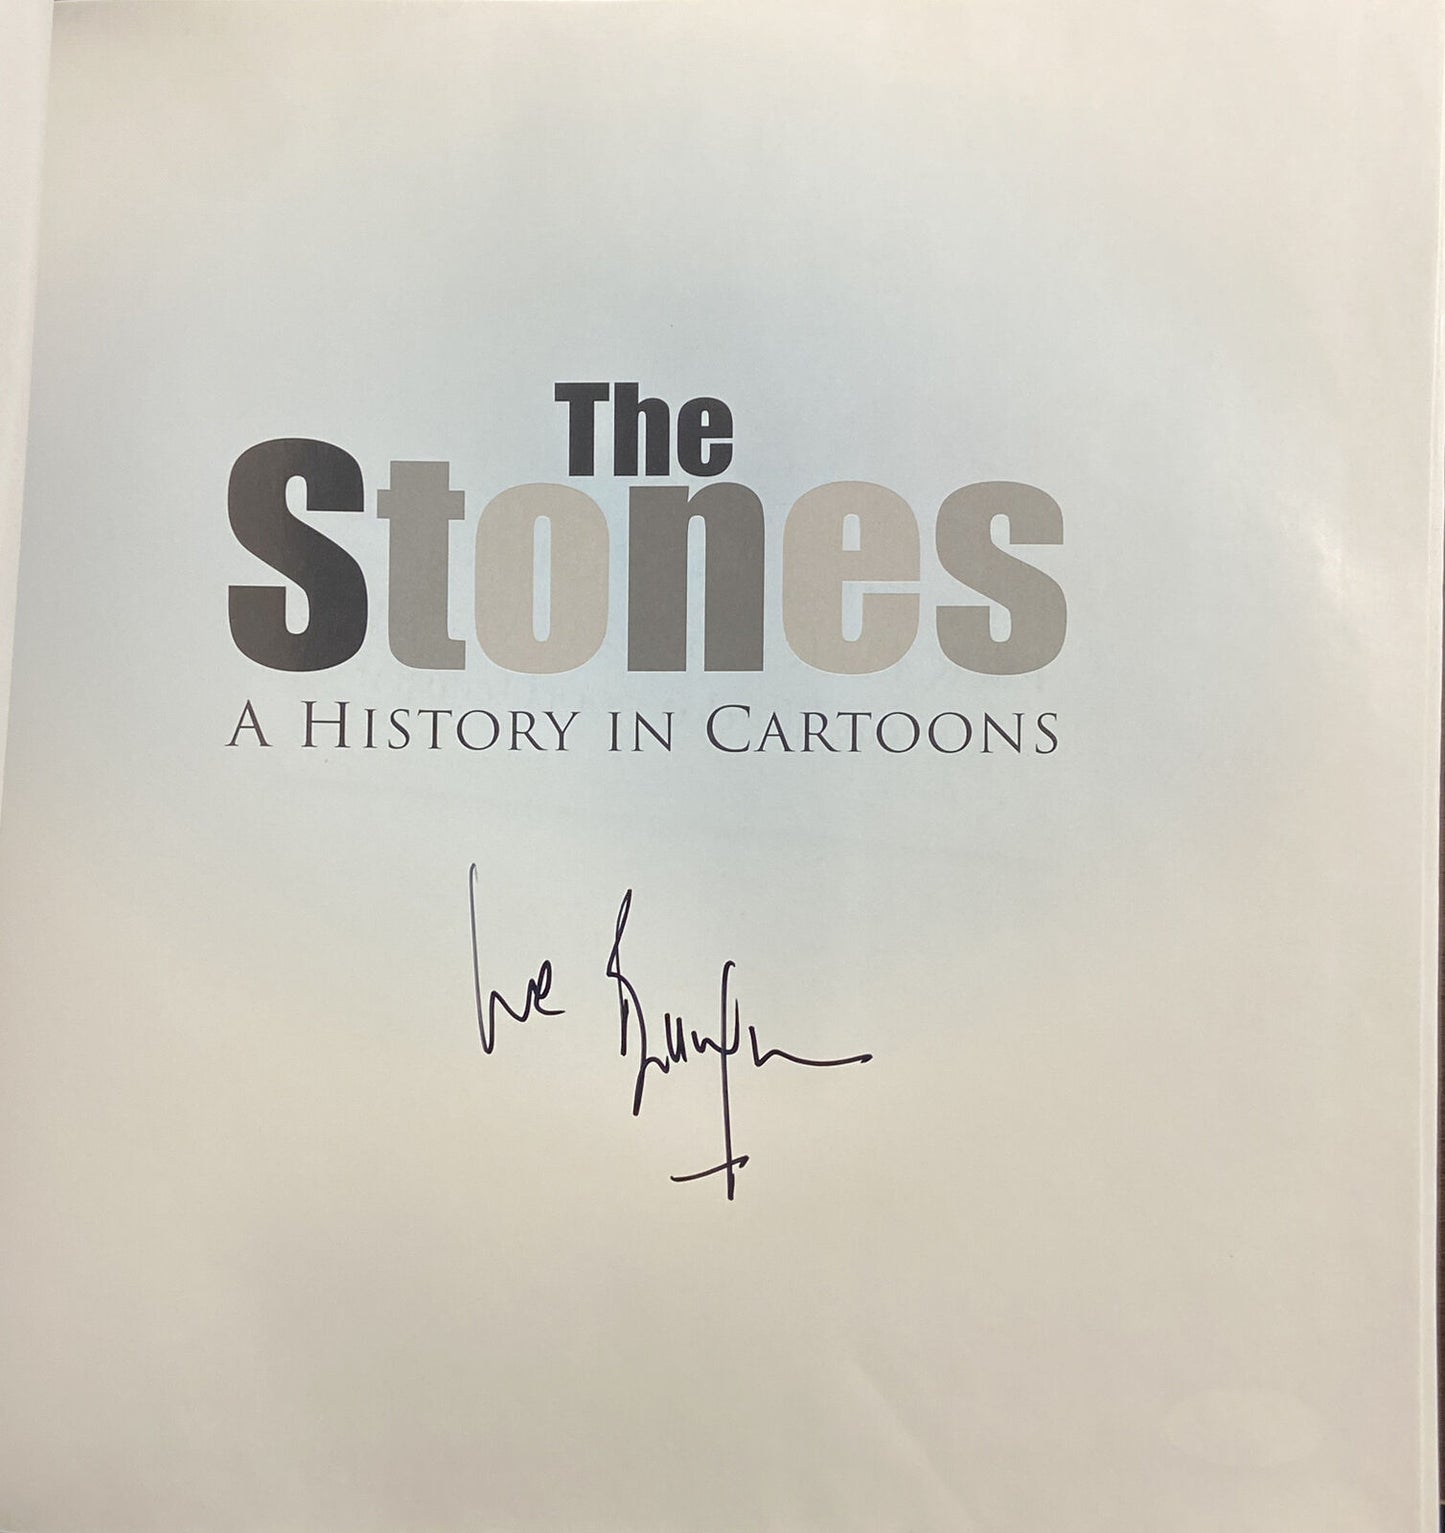 Bill Wyman Signed The Rolling Stones History In Cartoons Hardcover Autograph JSA